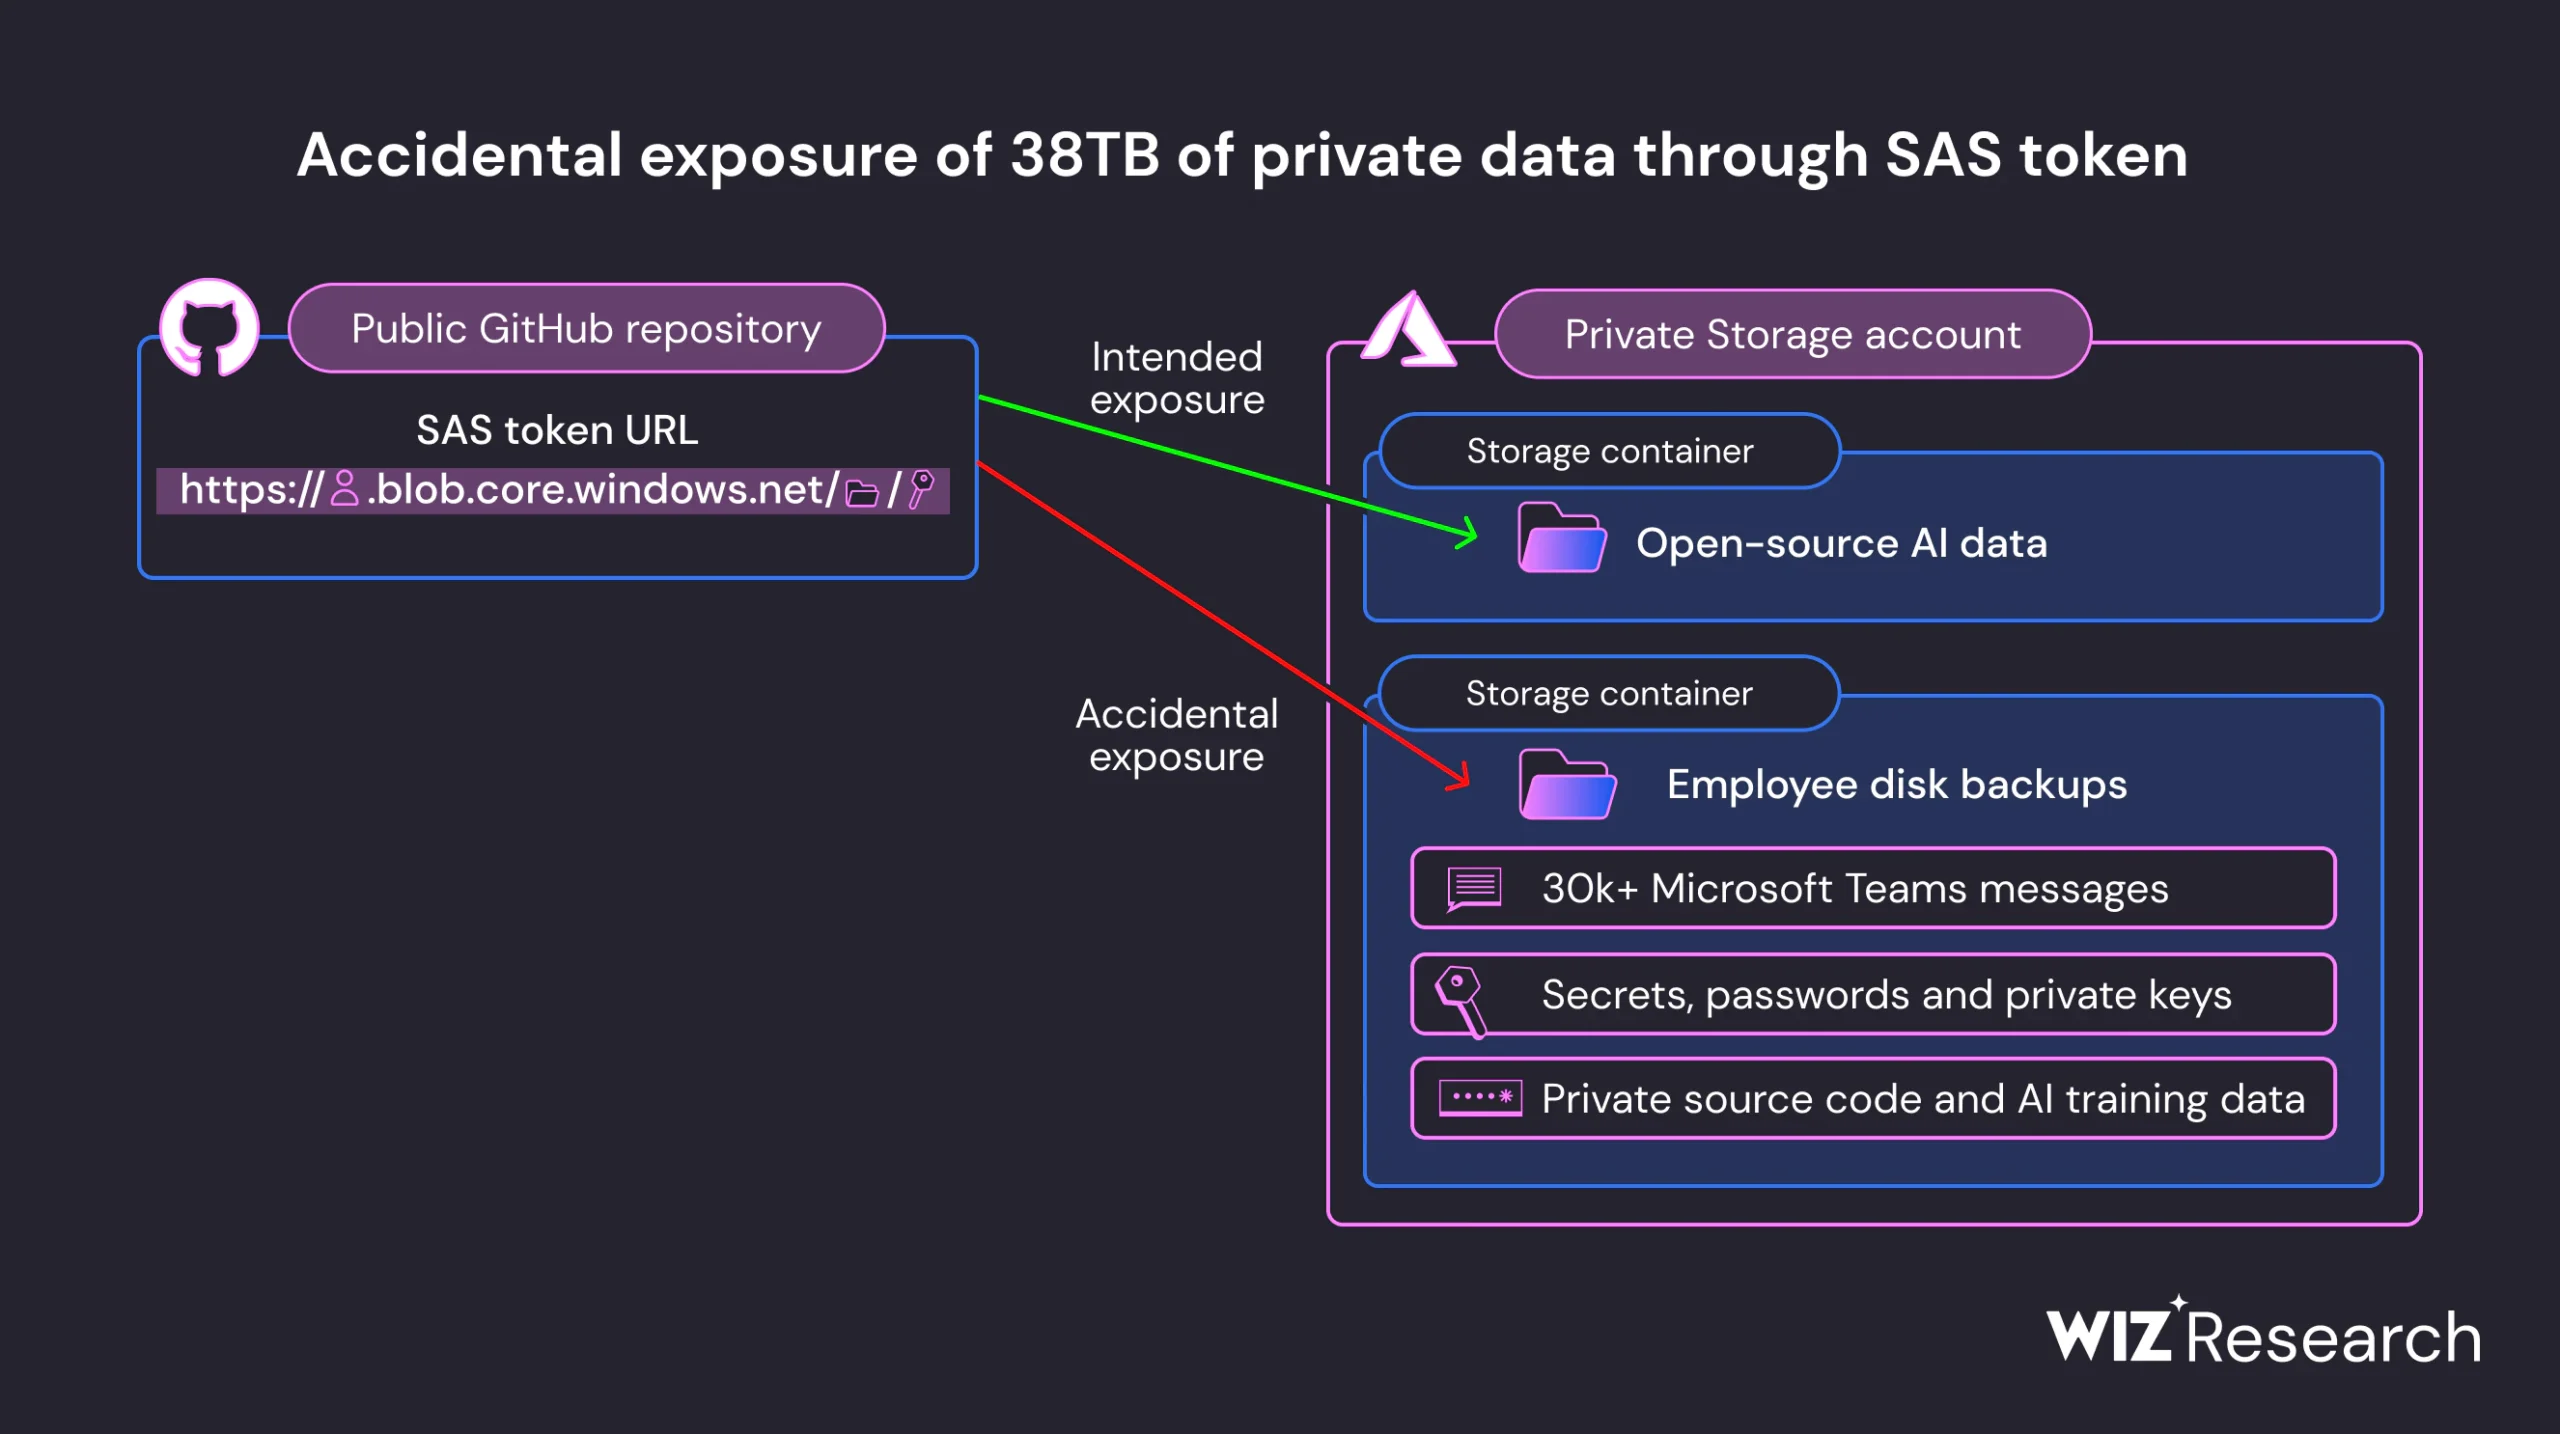 Exposed data includes backup of employees workstations, secrets, private keys, passwords, and over 30,000 internal Microsoft Teams messages. Researche